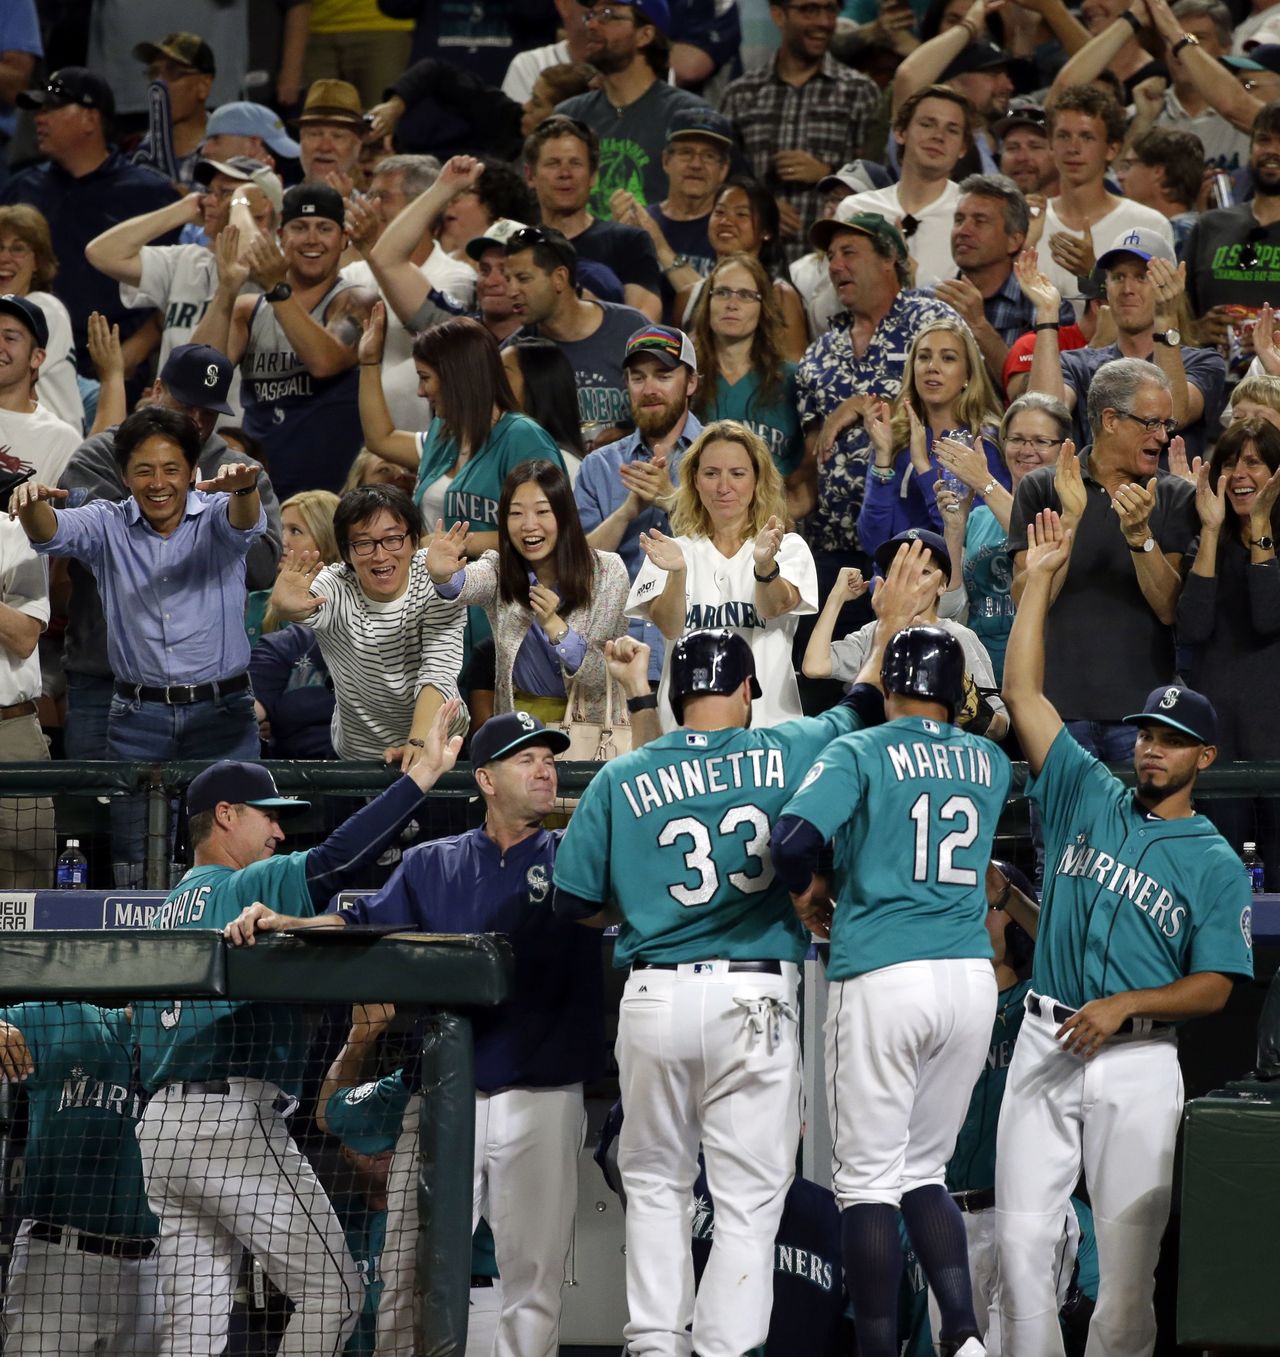 Fans cheer as the Mariners’ Chris Iannetta (33) and Leonys Martin (12) are greeted at the dugout by Luis Sardinas (right) after Iannetta and Martin scored on a three-run triple by Ketel Marte against the Angels on Friday.